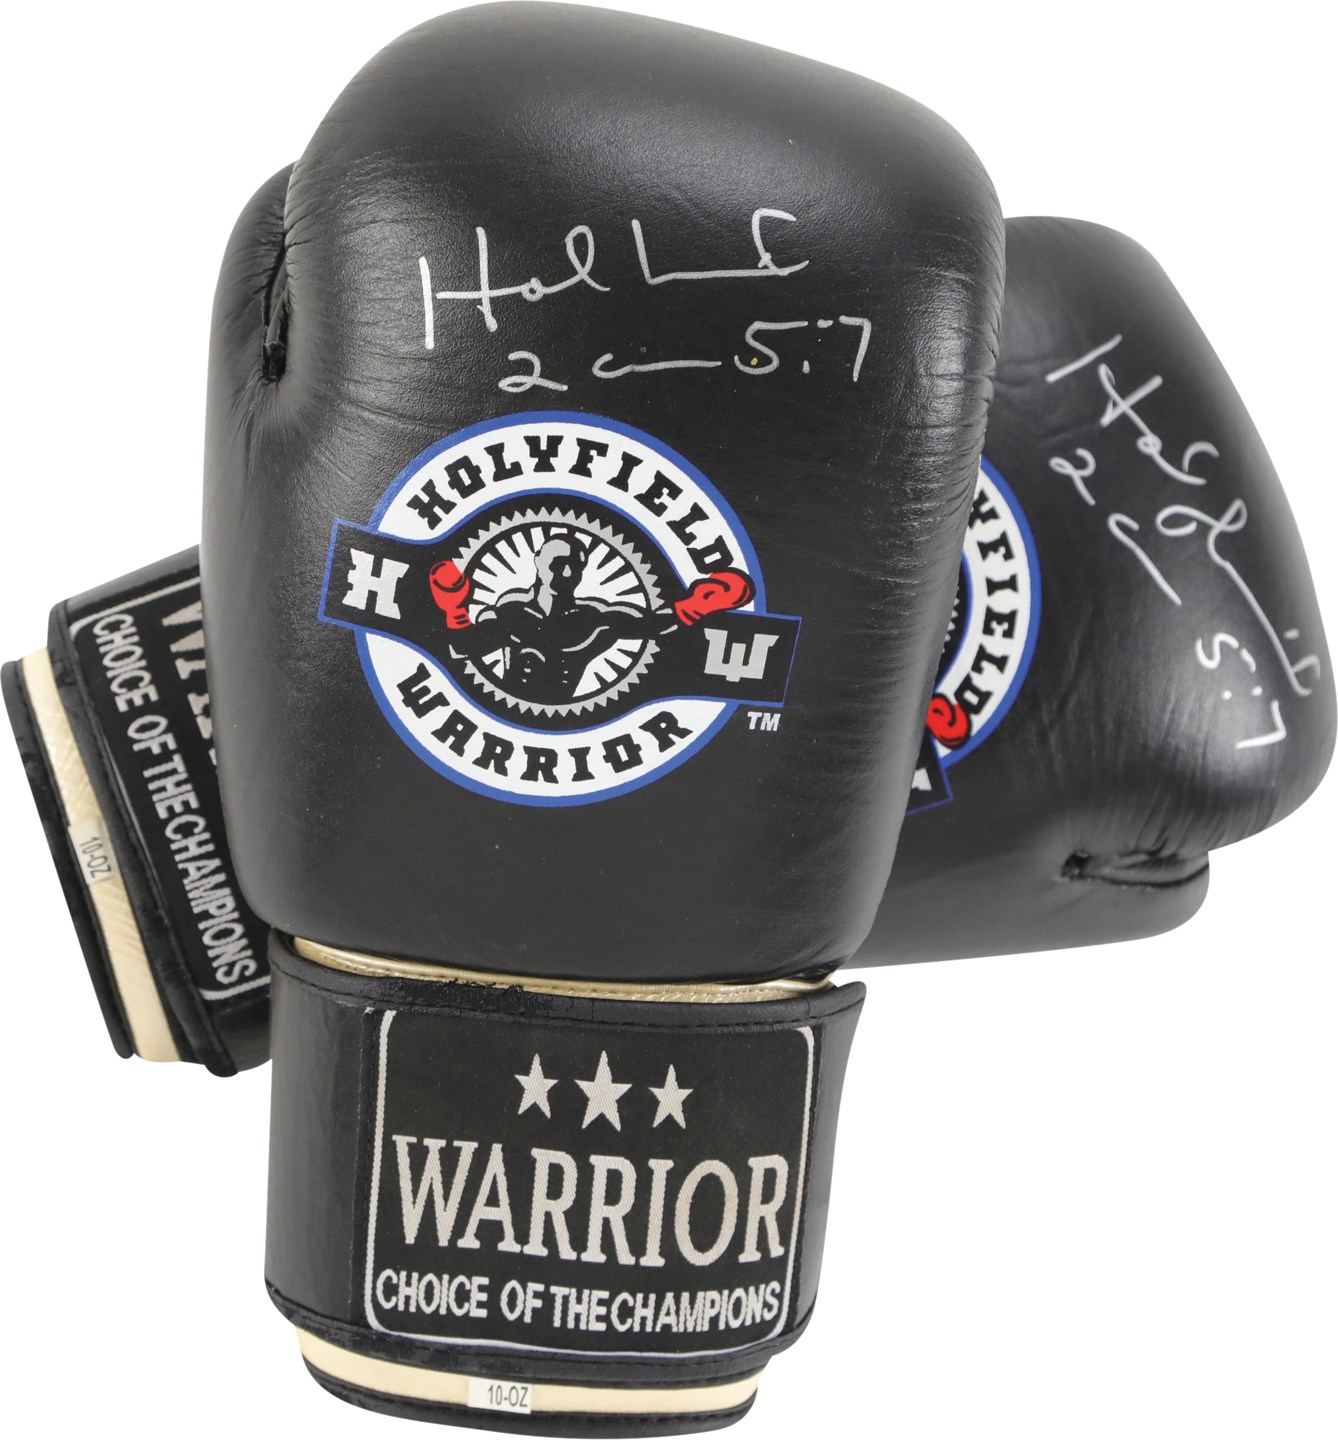 - Evander Holyfield Signed Worn Gloves from Home Gym